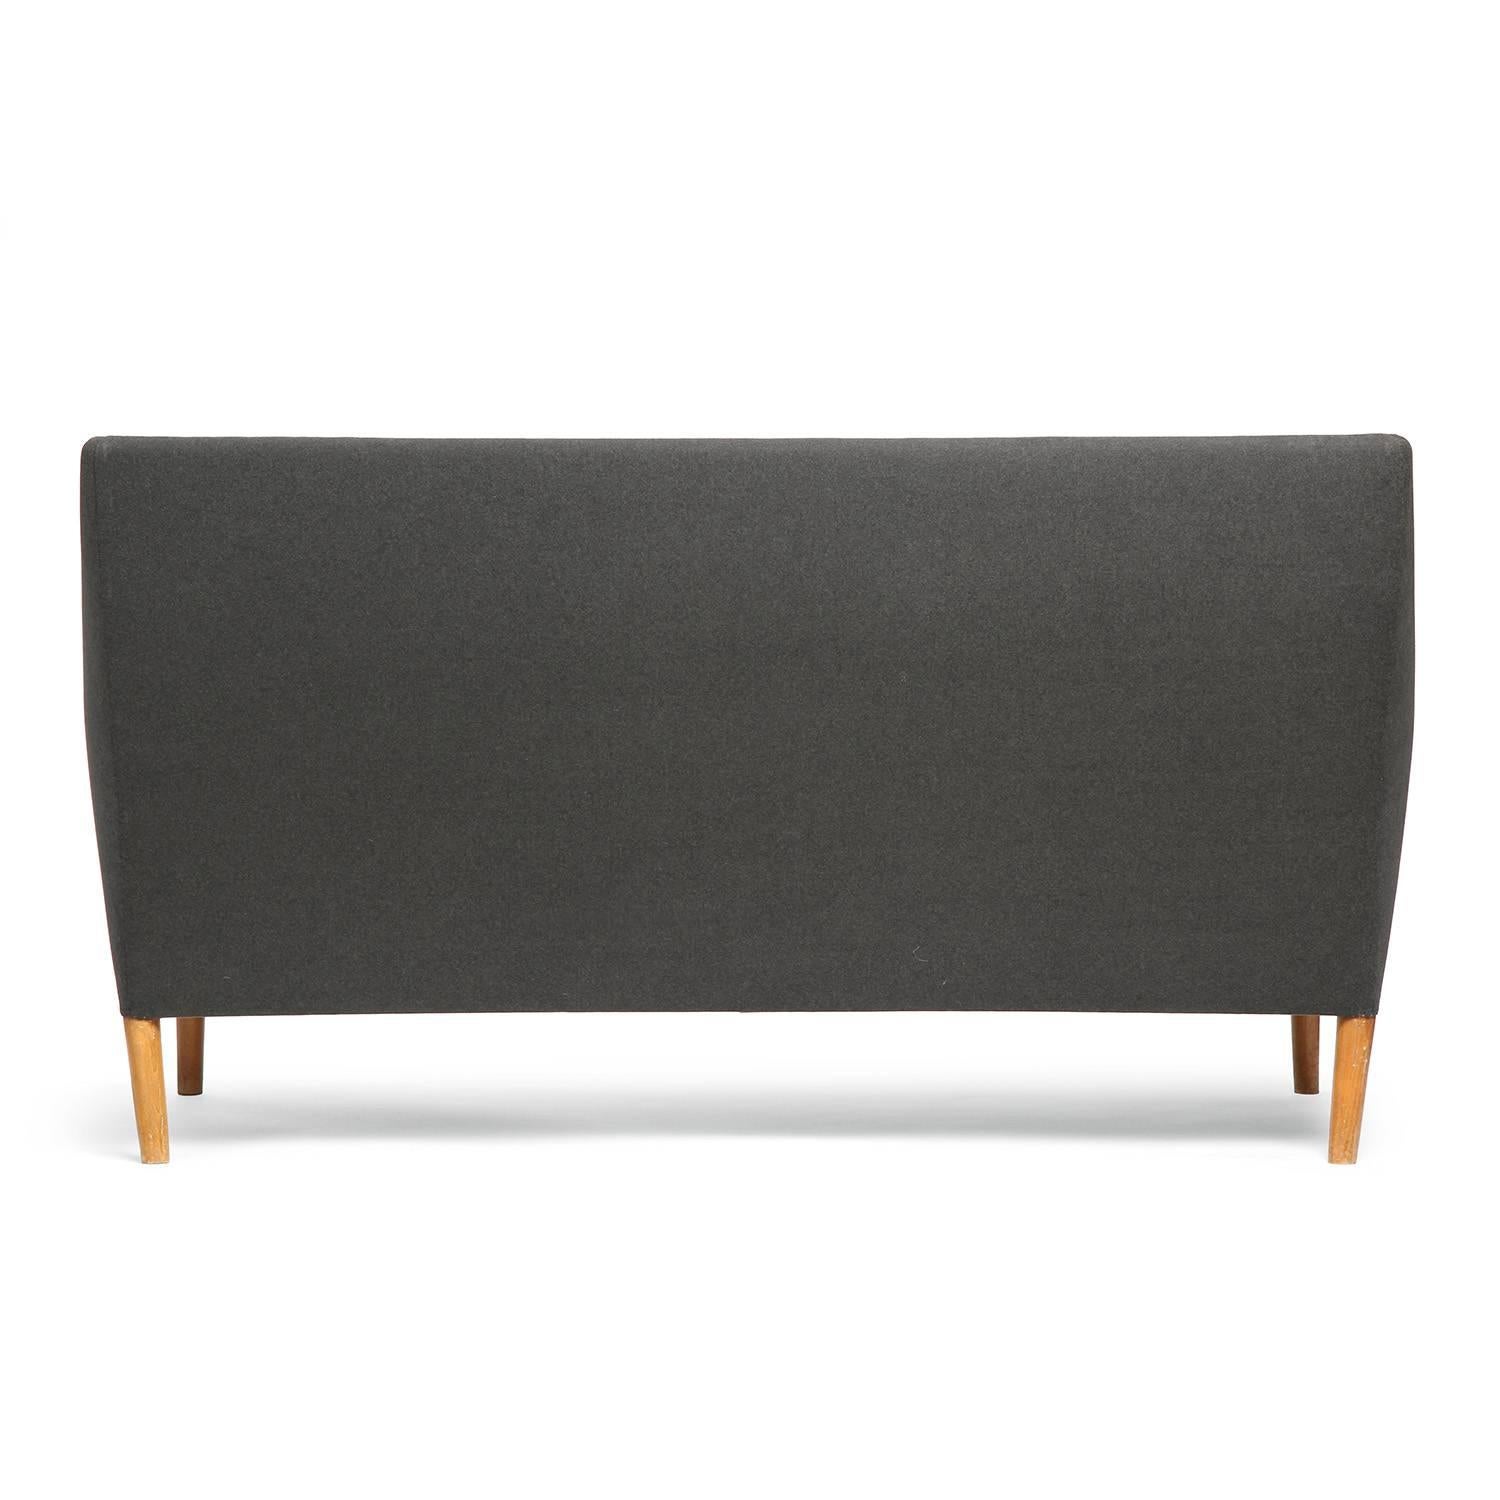 Mid-20th Century High Backed Sofa by Larsen and Madsen